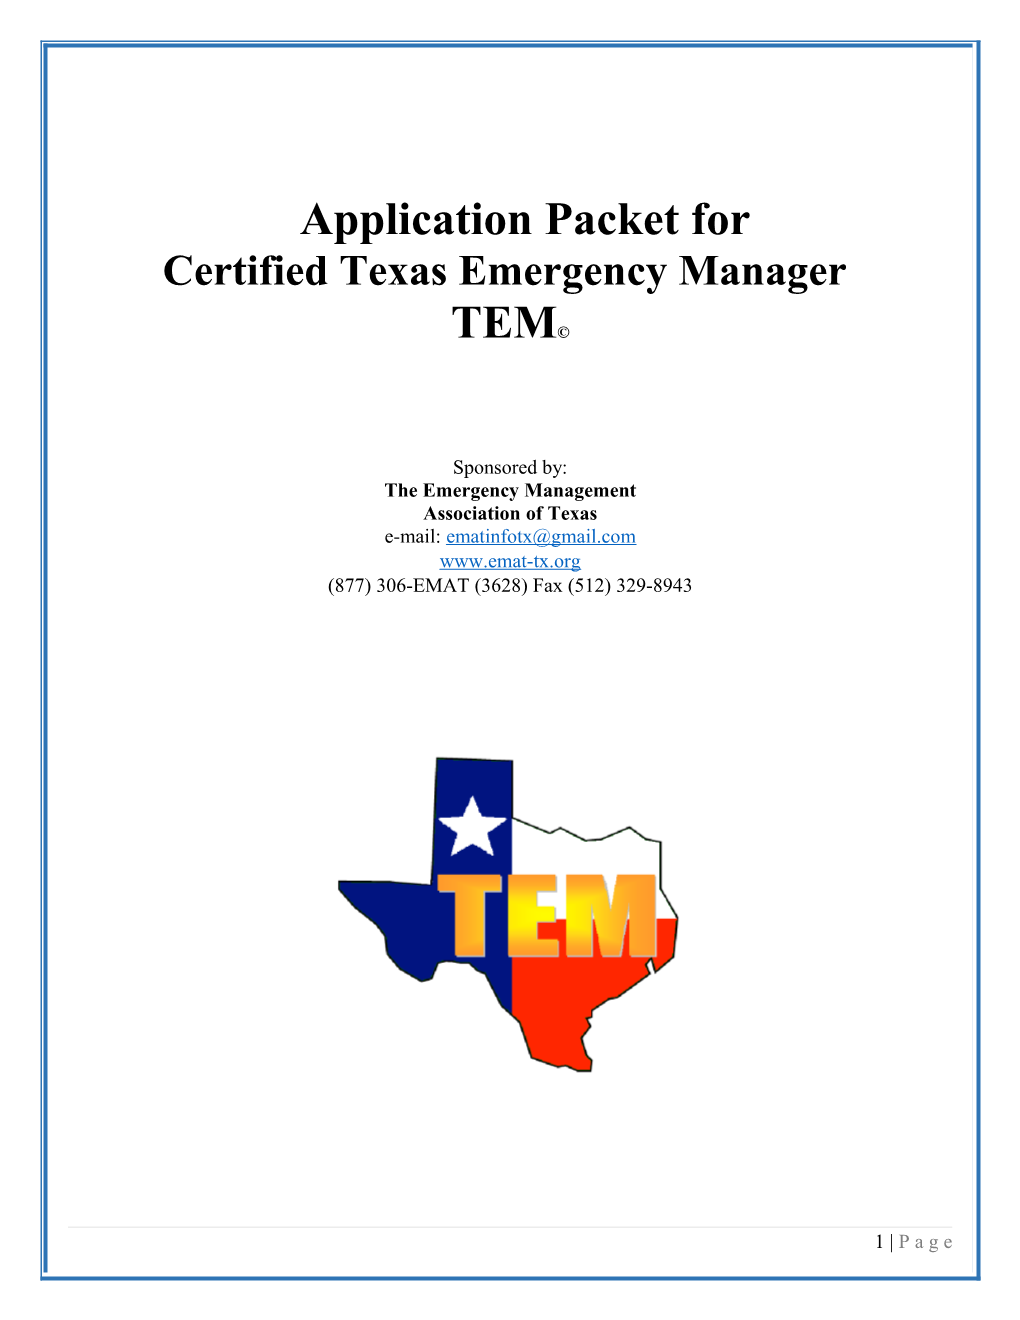 Certified Texas Emergency Manager